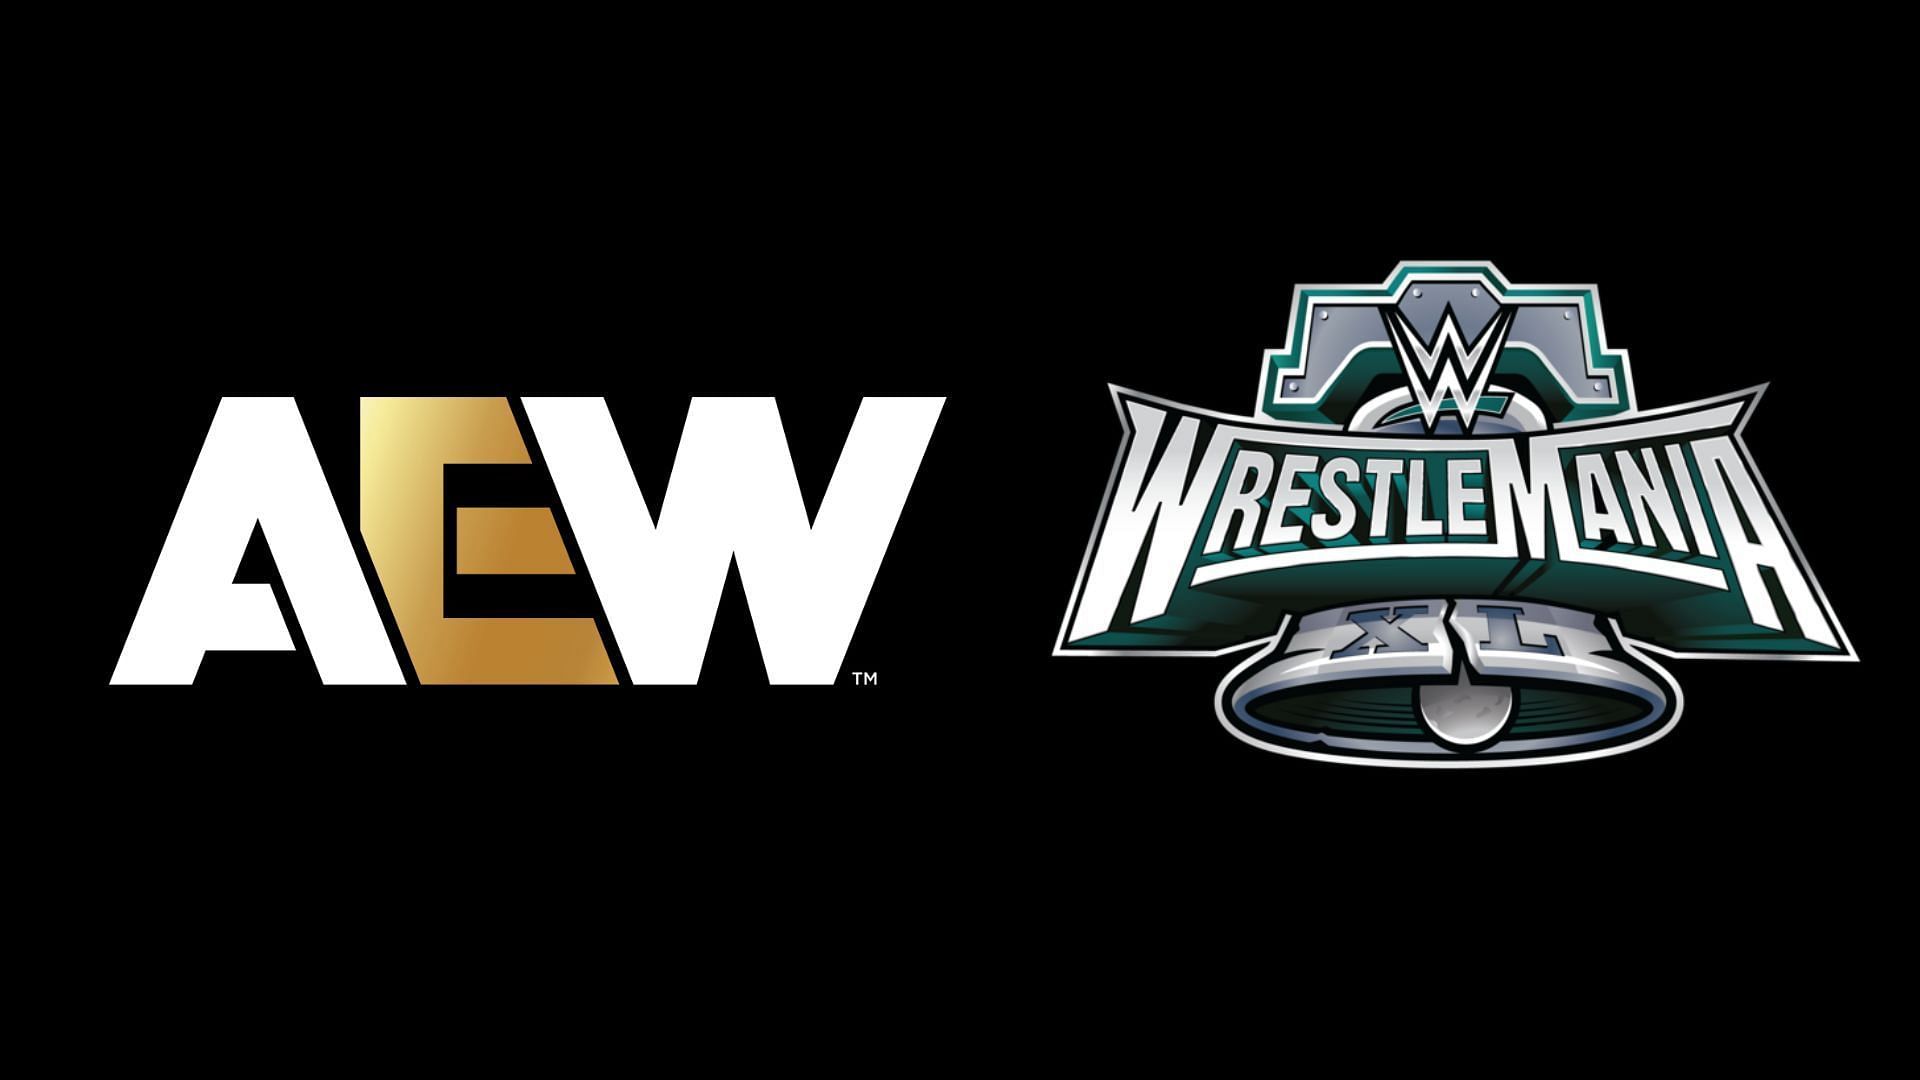 WrestleMania XL will be going on for two nights on April 6th and 7th [Photo courtesy of WWE and AEW